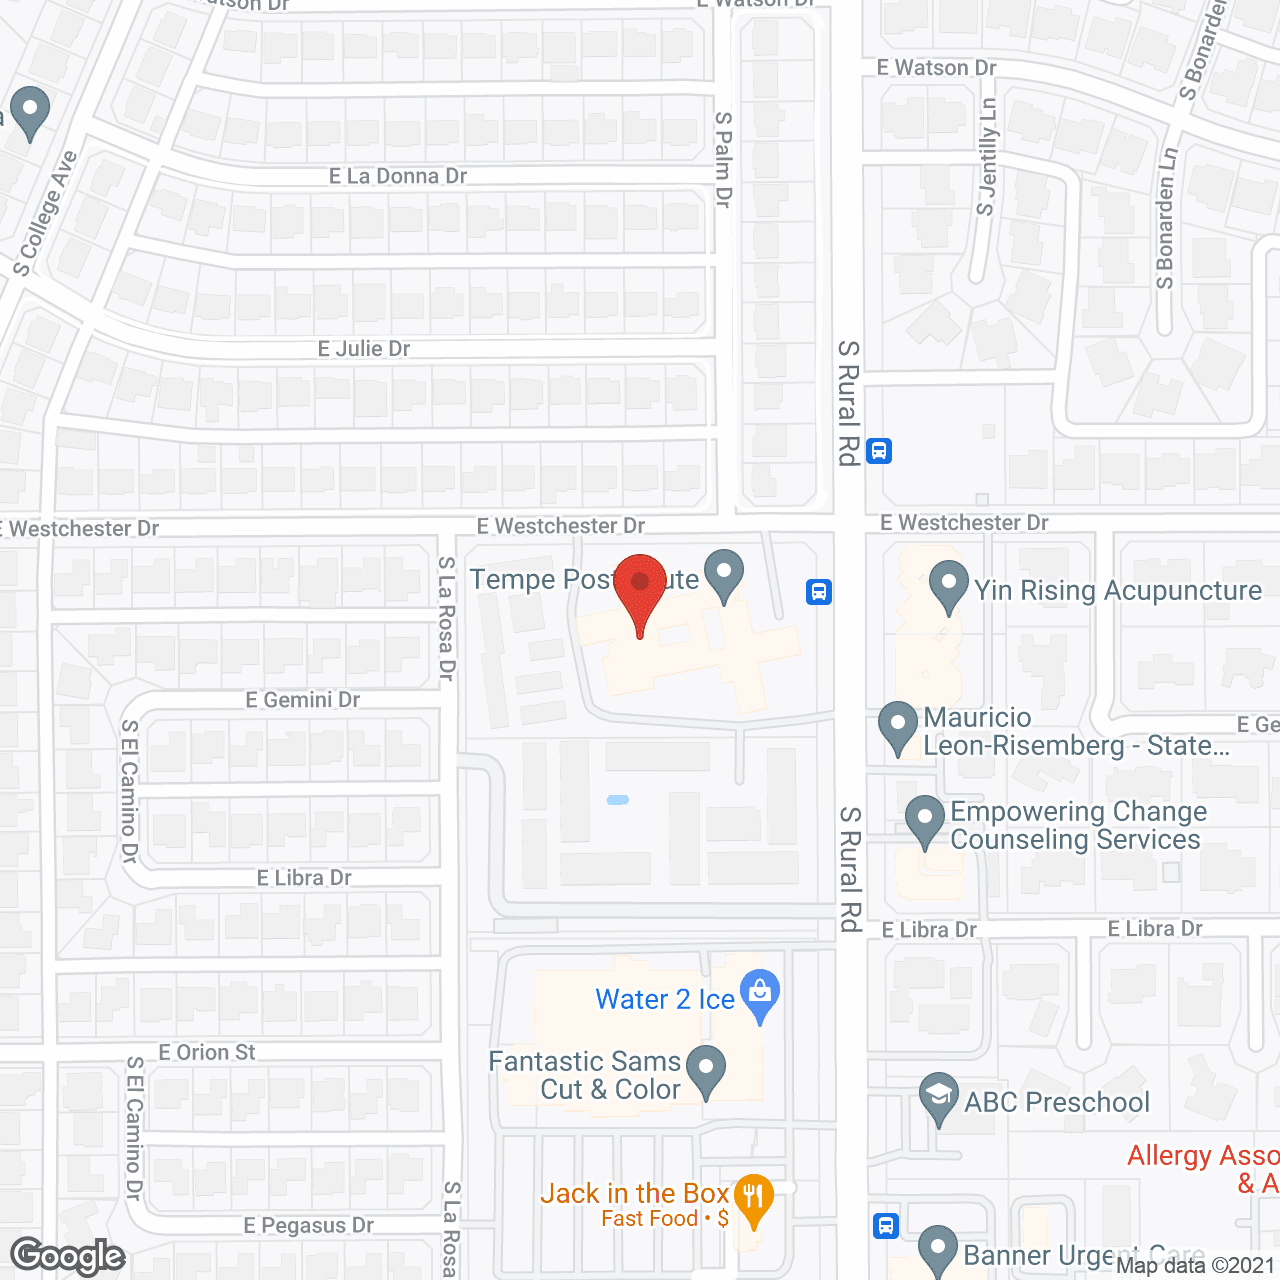 Tempe Post Acute in google map